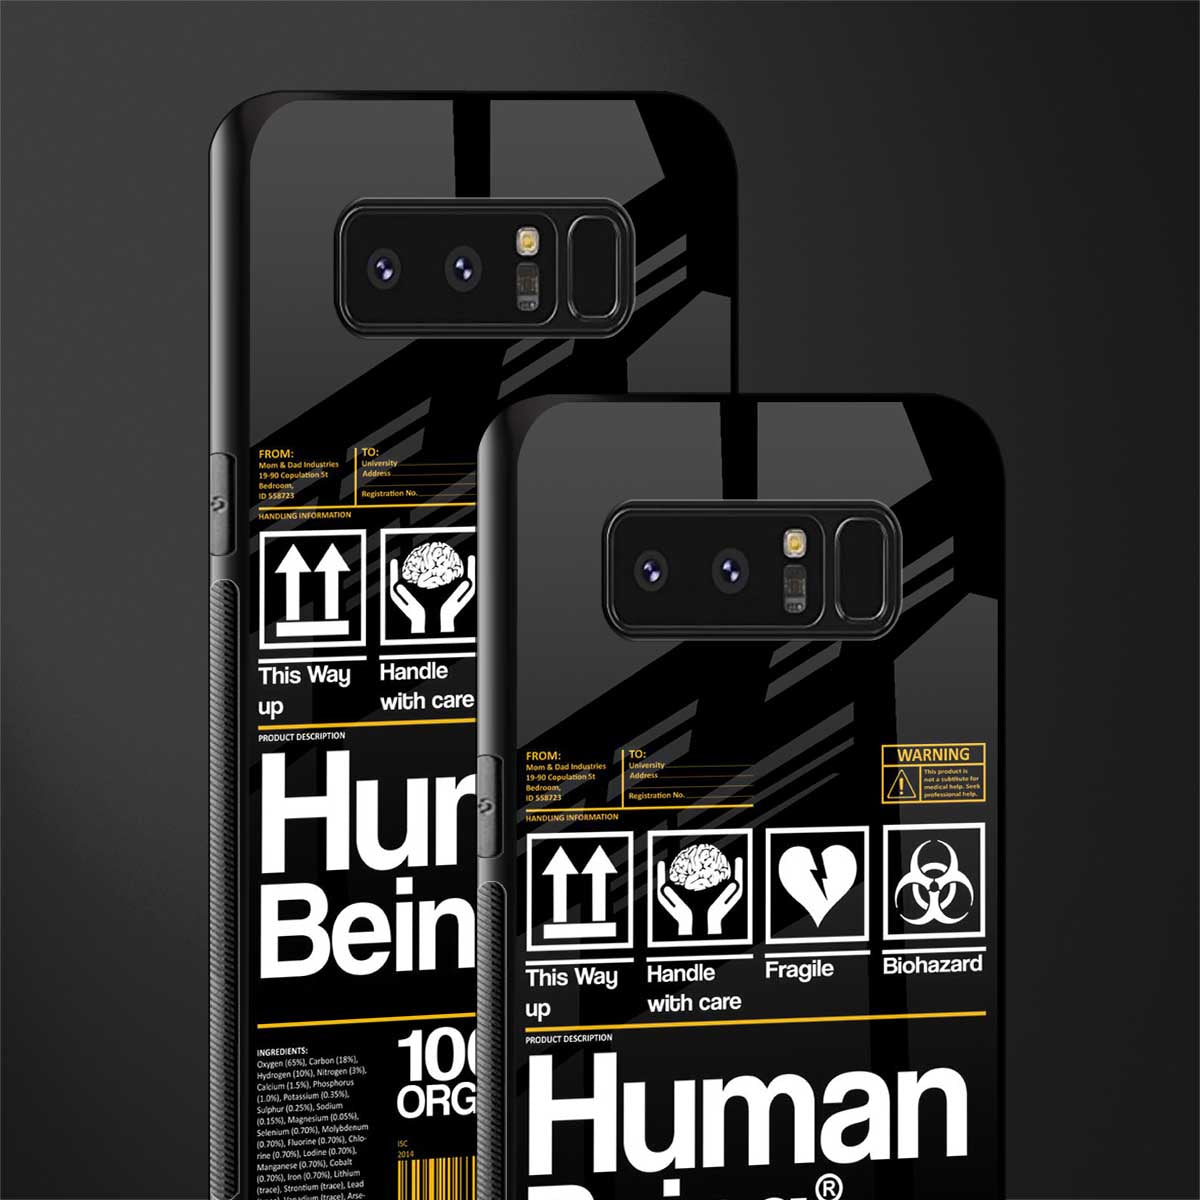 human being label phone cover for samsung galaxy note 8